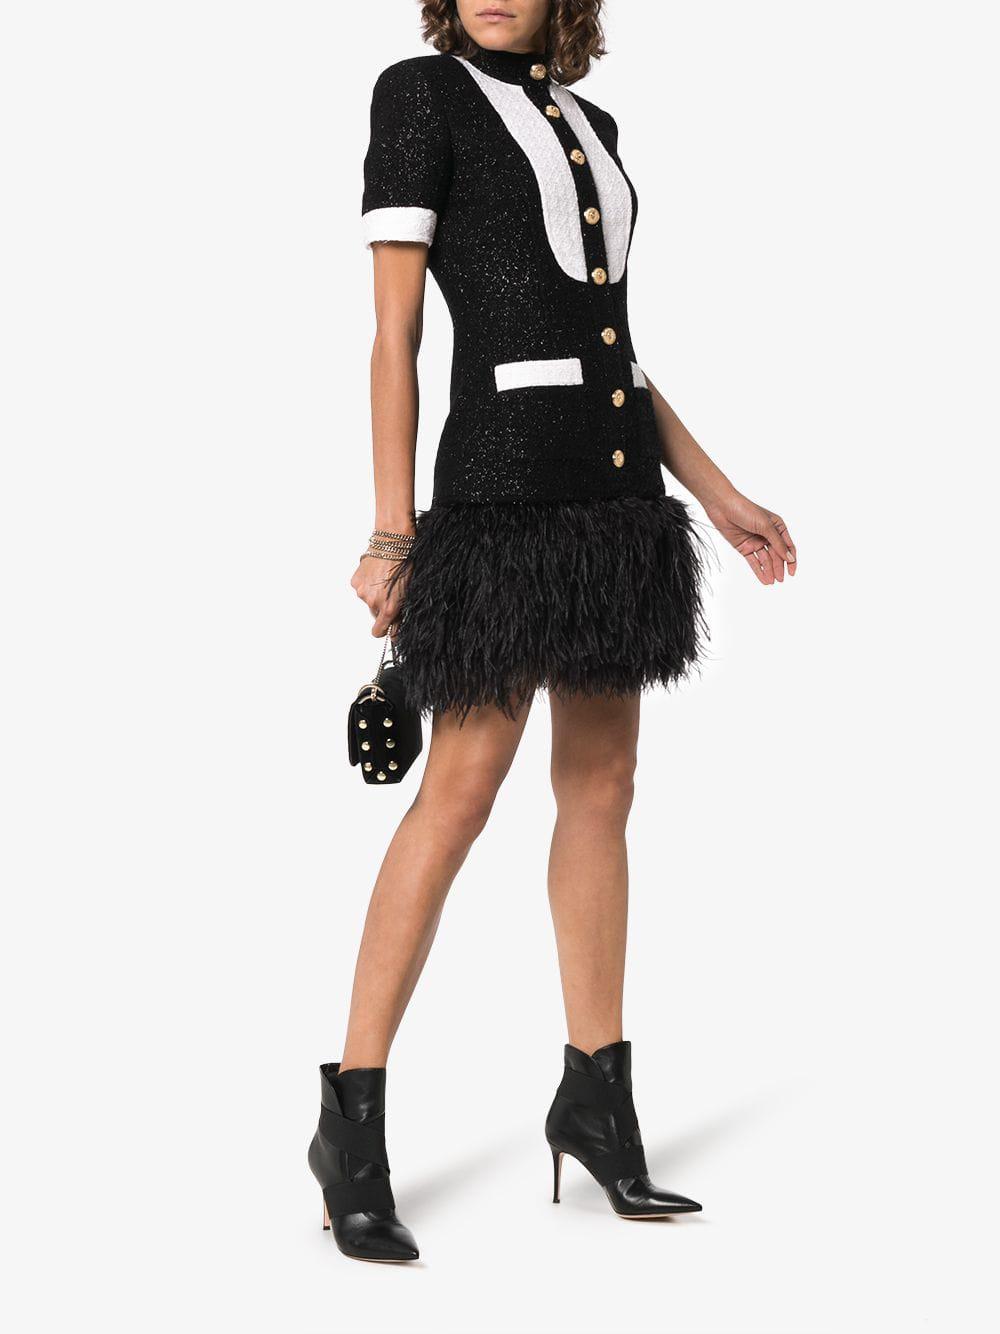 Balmain Metallic Tweed Dress With Ostrich Feathers in Black | Lyst